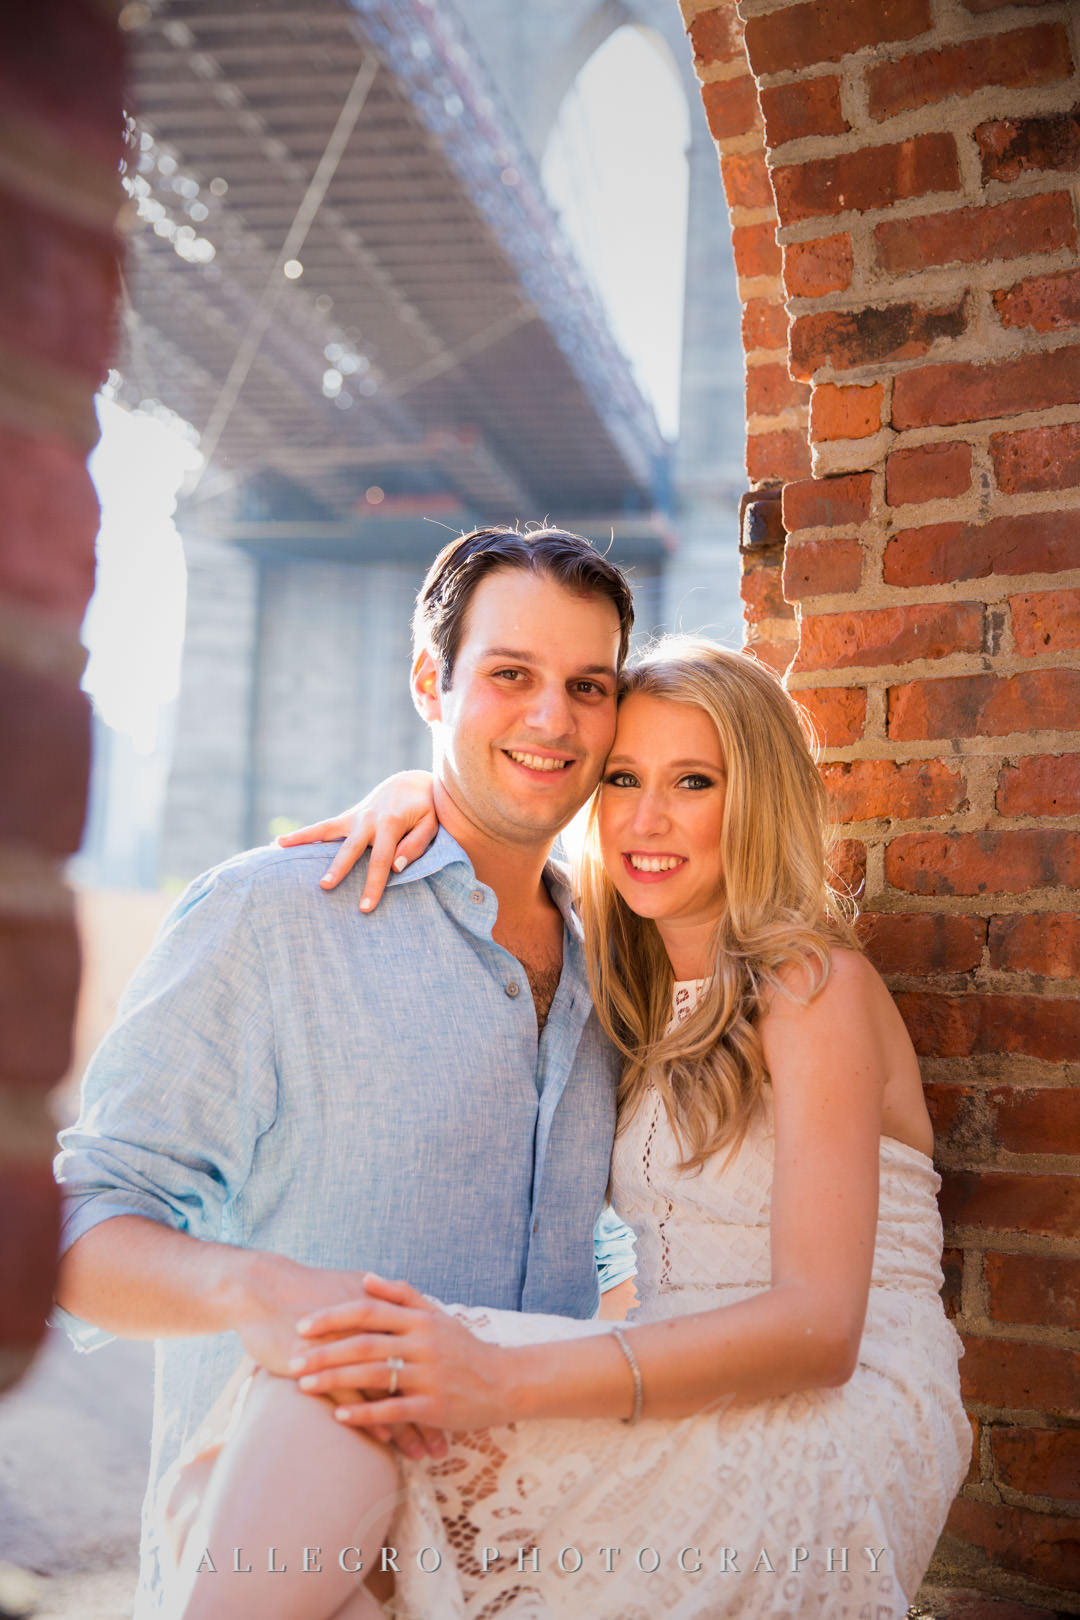 Newly engaged couple smiling in Brooklyn | Allegro Photography